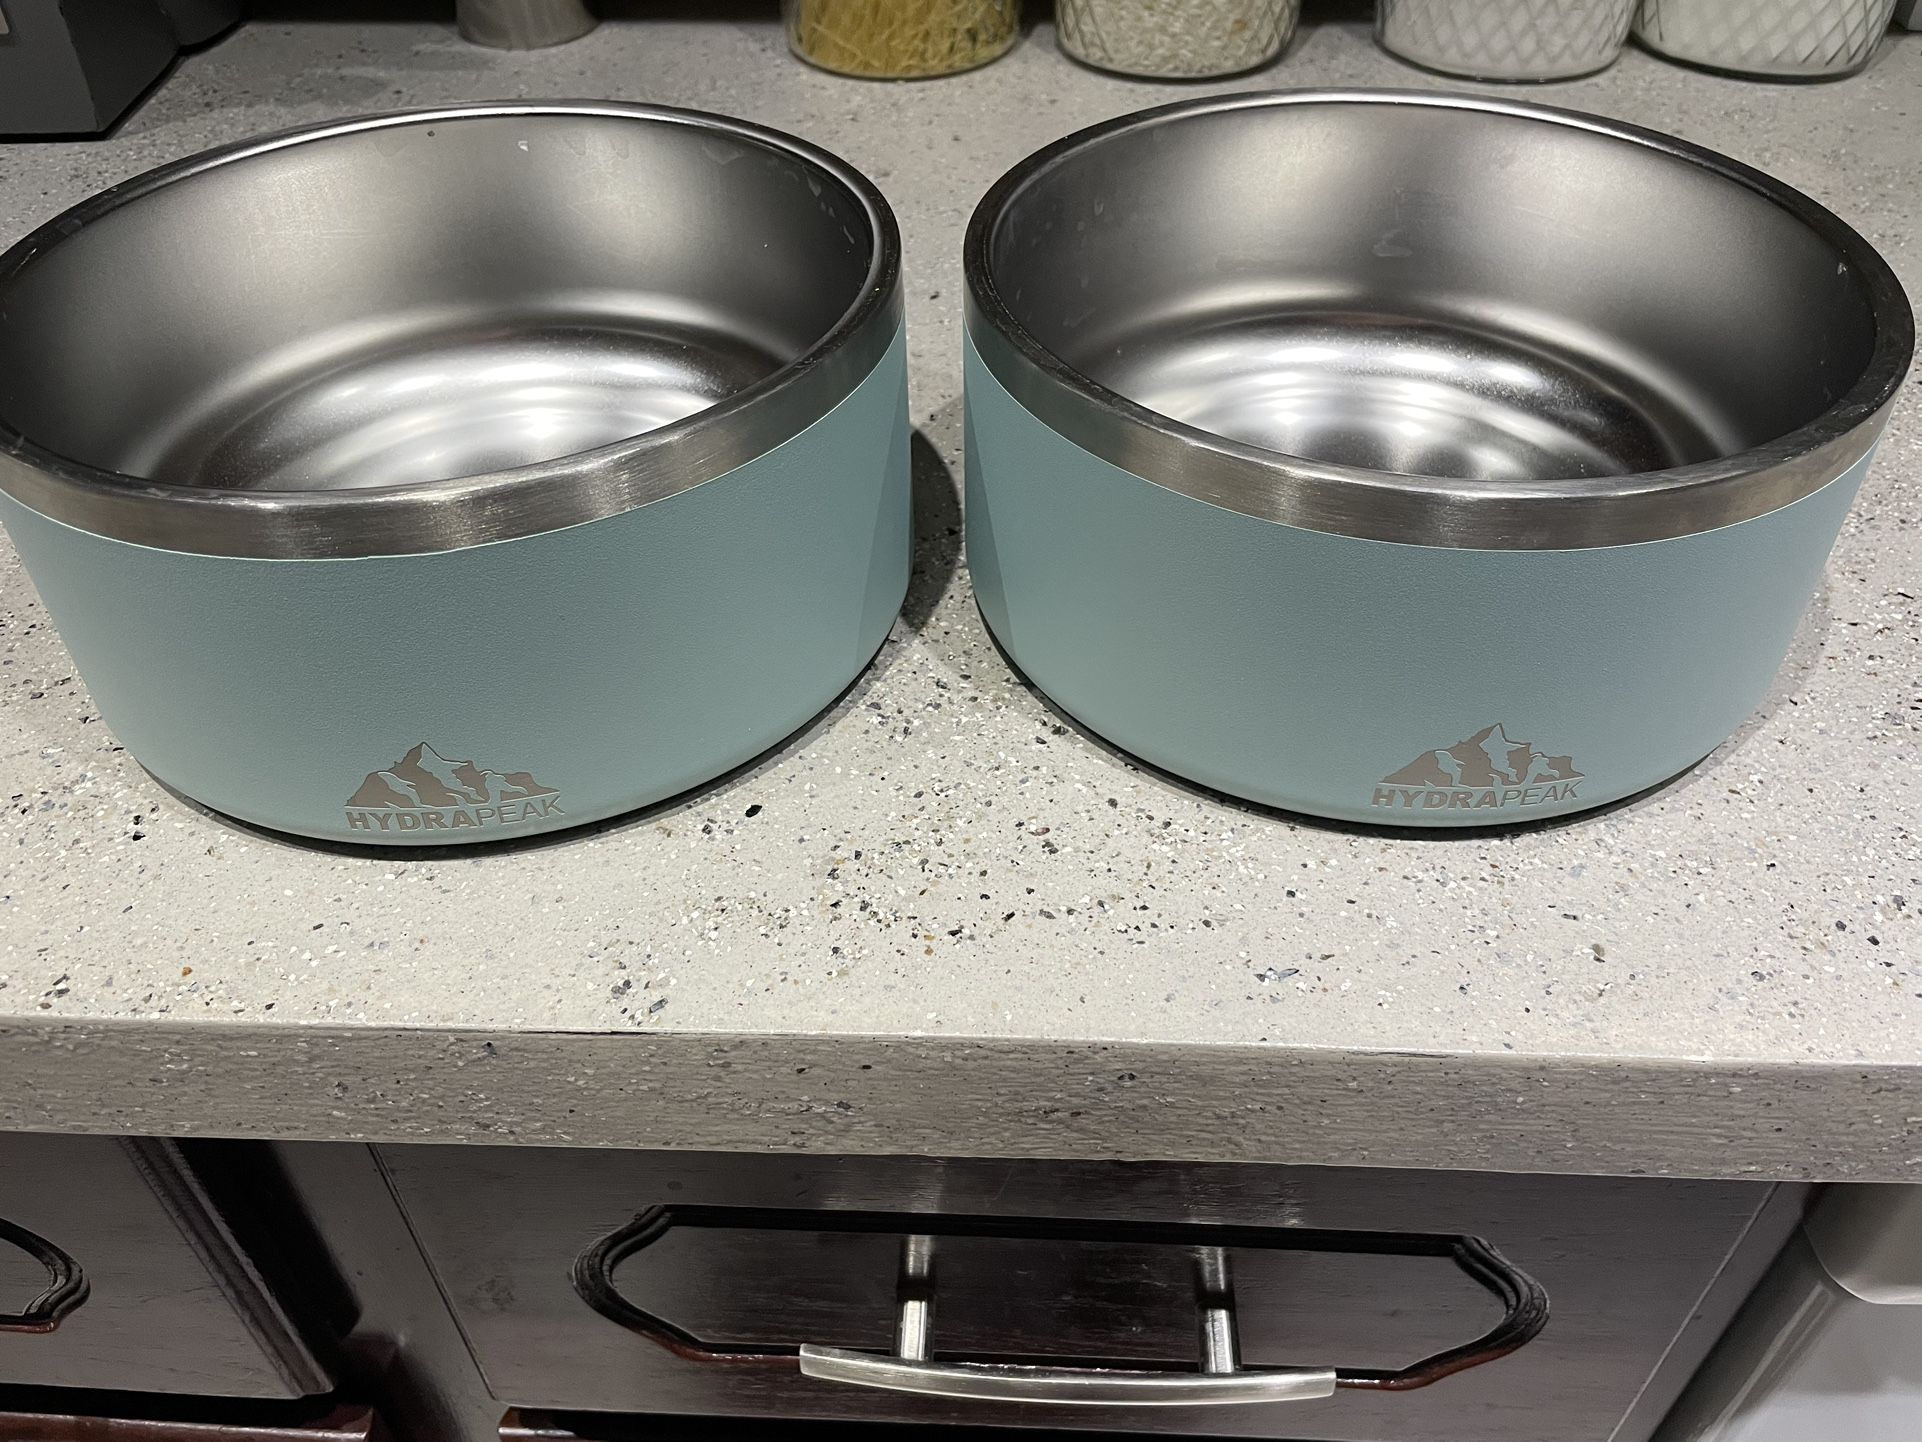 2 Hydra peak Stainless Steel Dog Bowls 8 Cup 